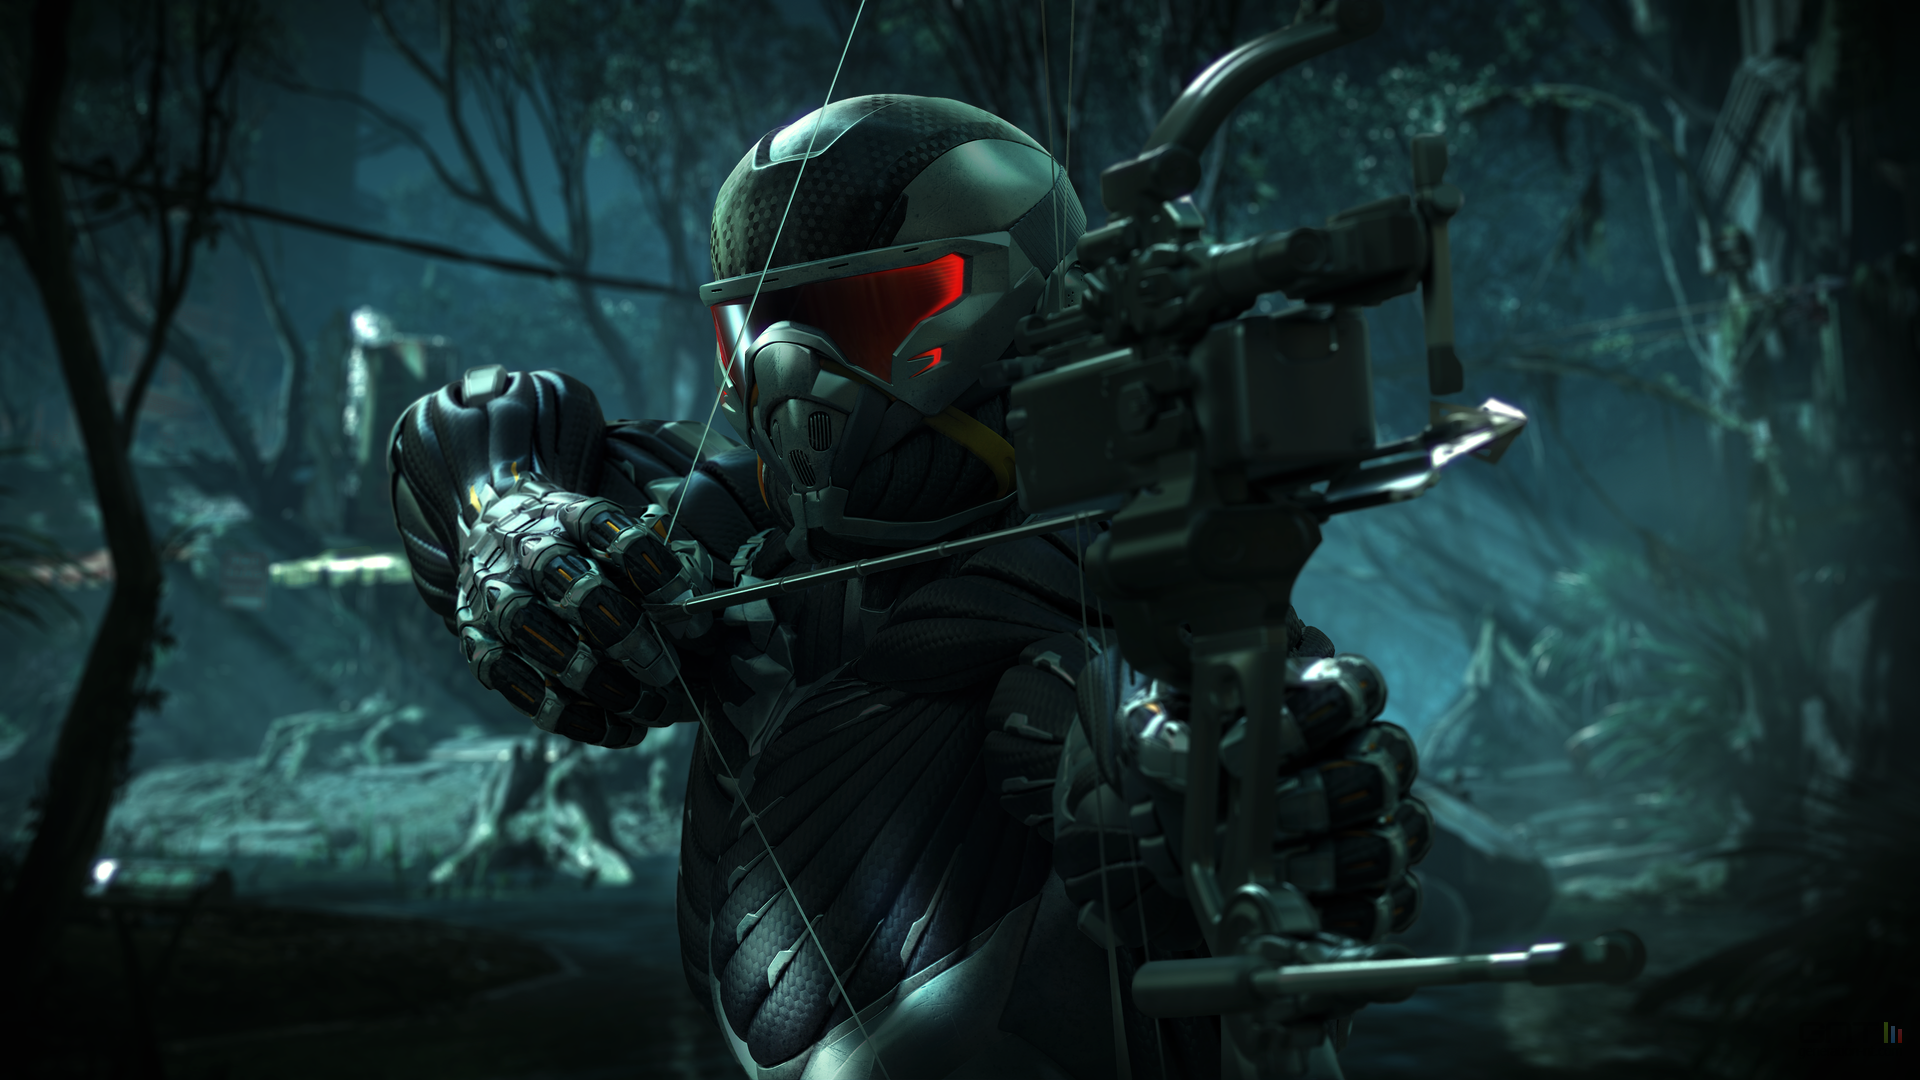 Crysis 3 screen 2 - Prophet and the bow